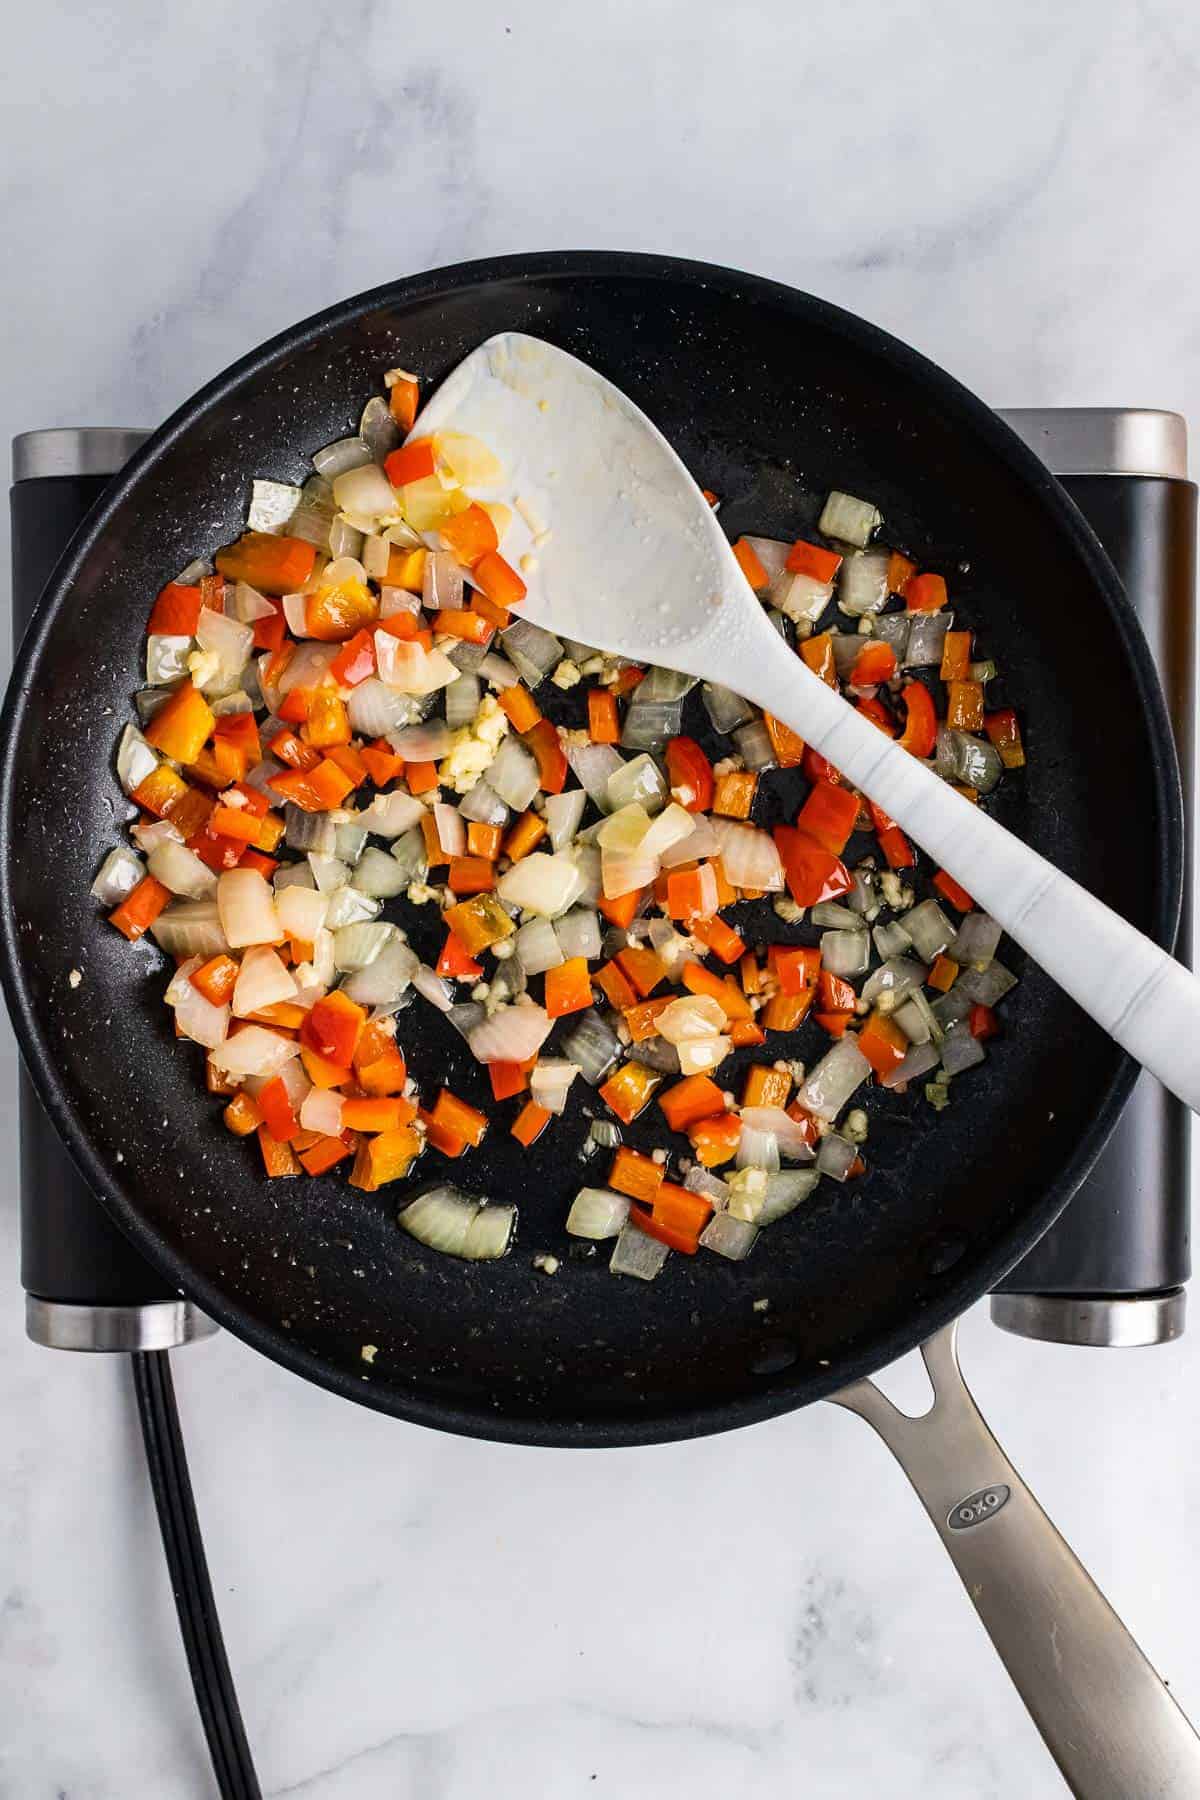 Diced onions and peppers cooking in a pan in oil with a spatula